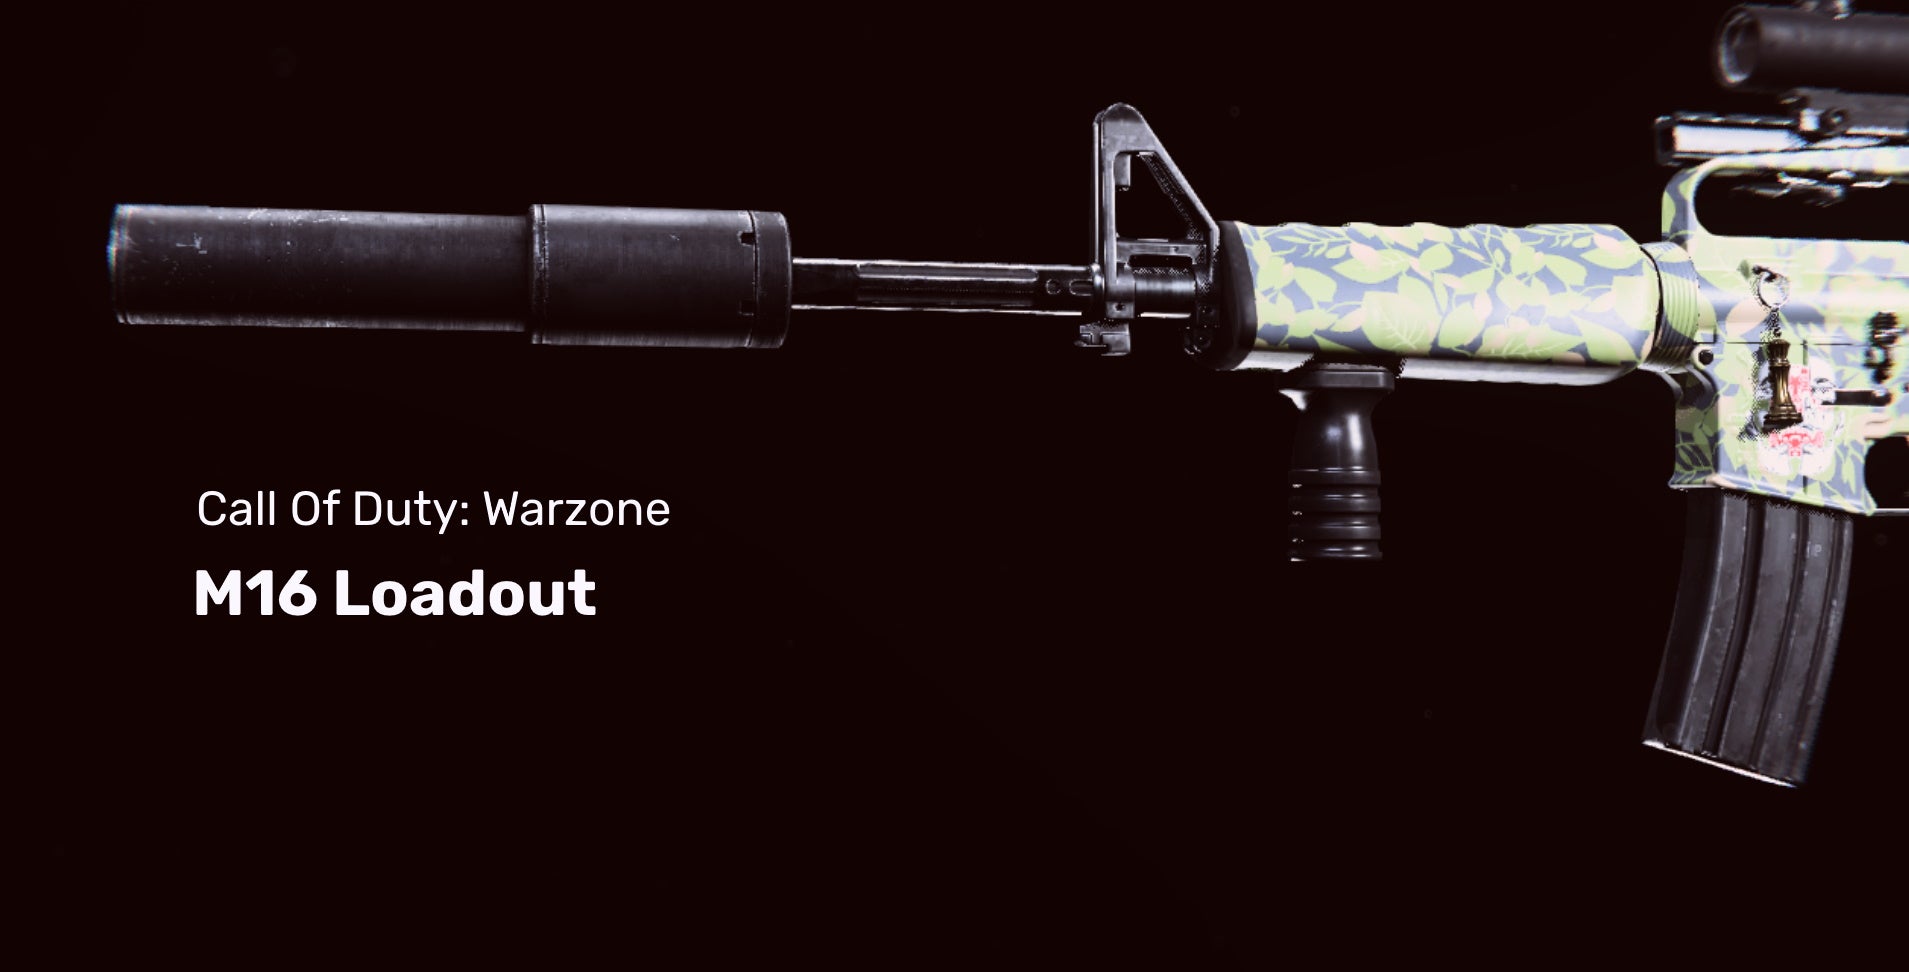 Call of Duty Warzone's M16 on a black background